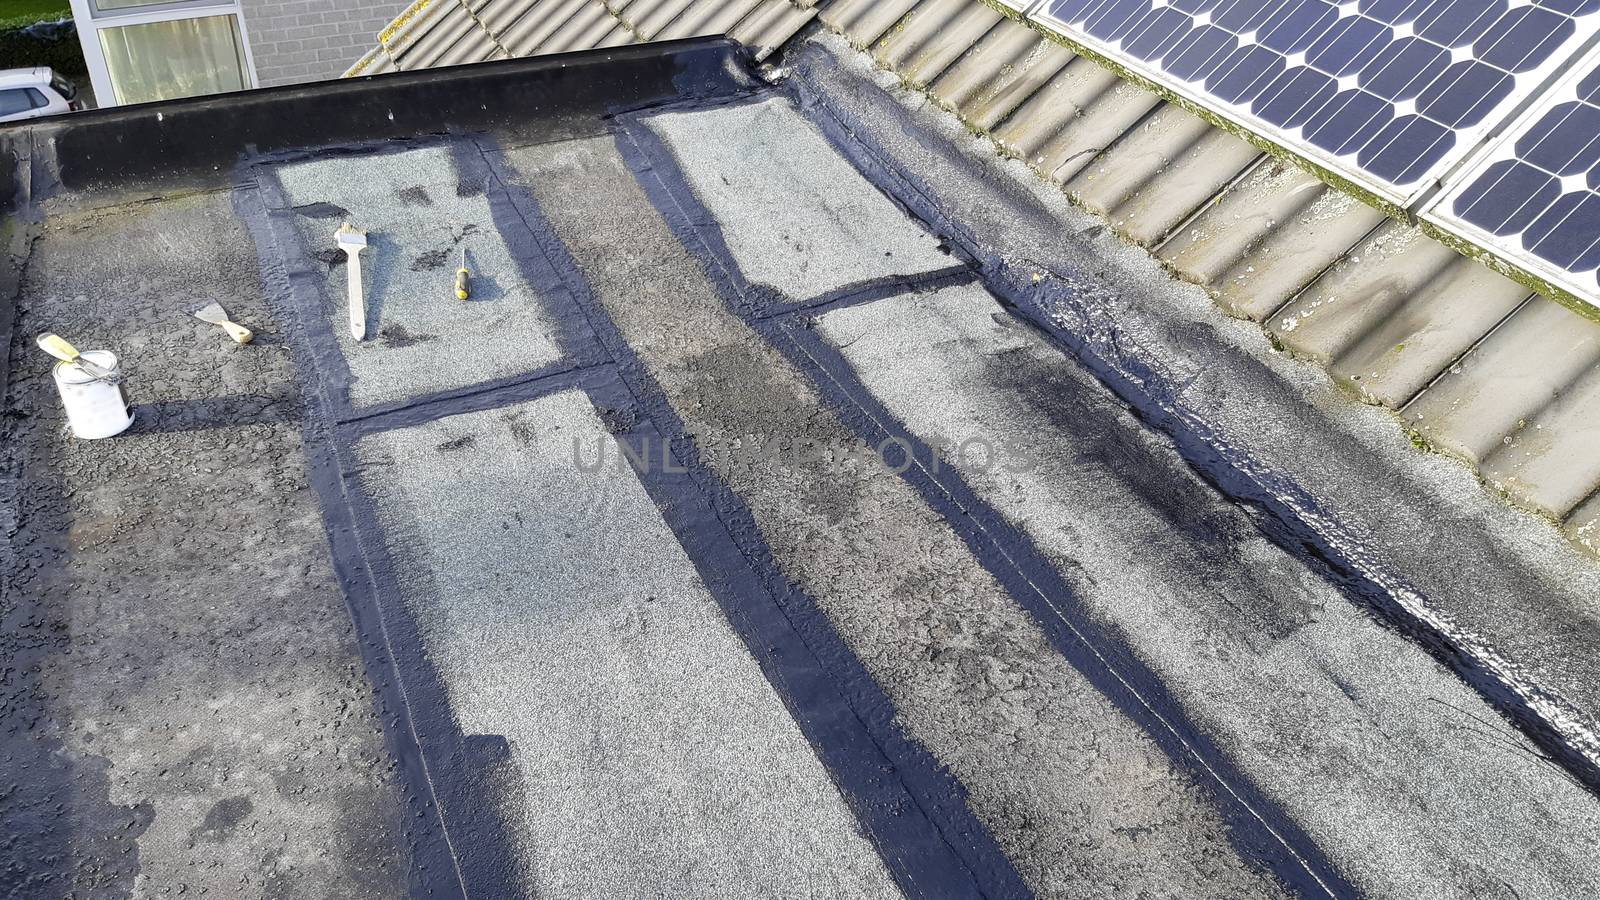 Tar foil roof repair: new patches installed to prevent further leaking from the roof. Emergency repair.